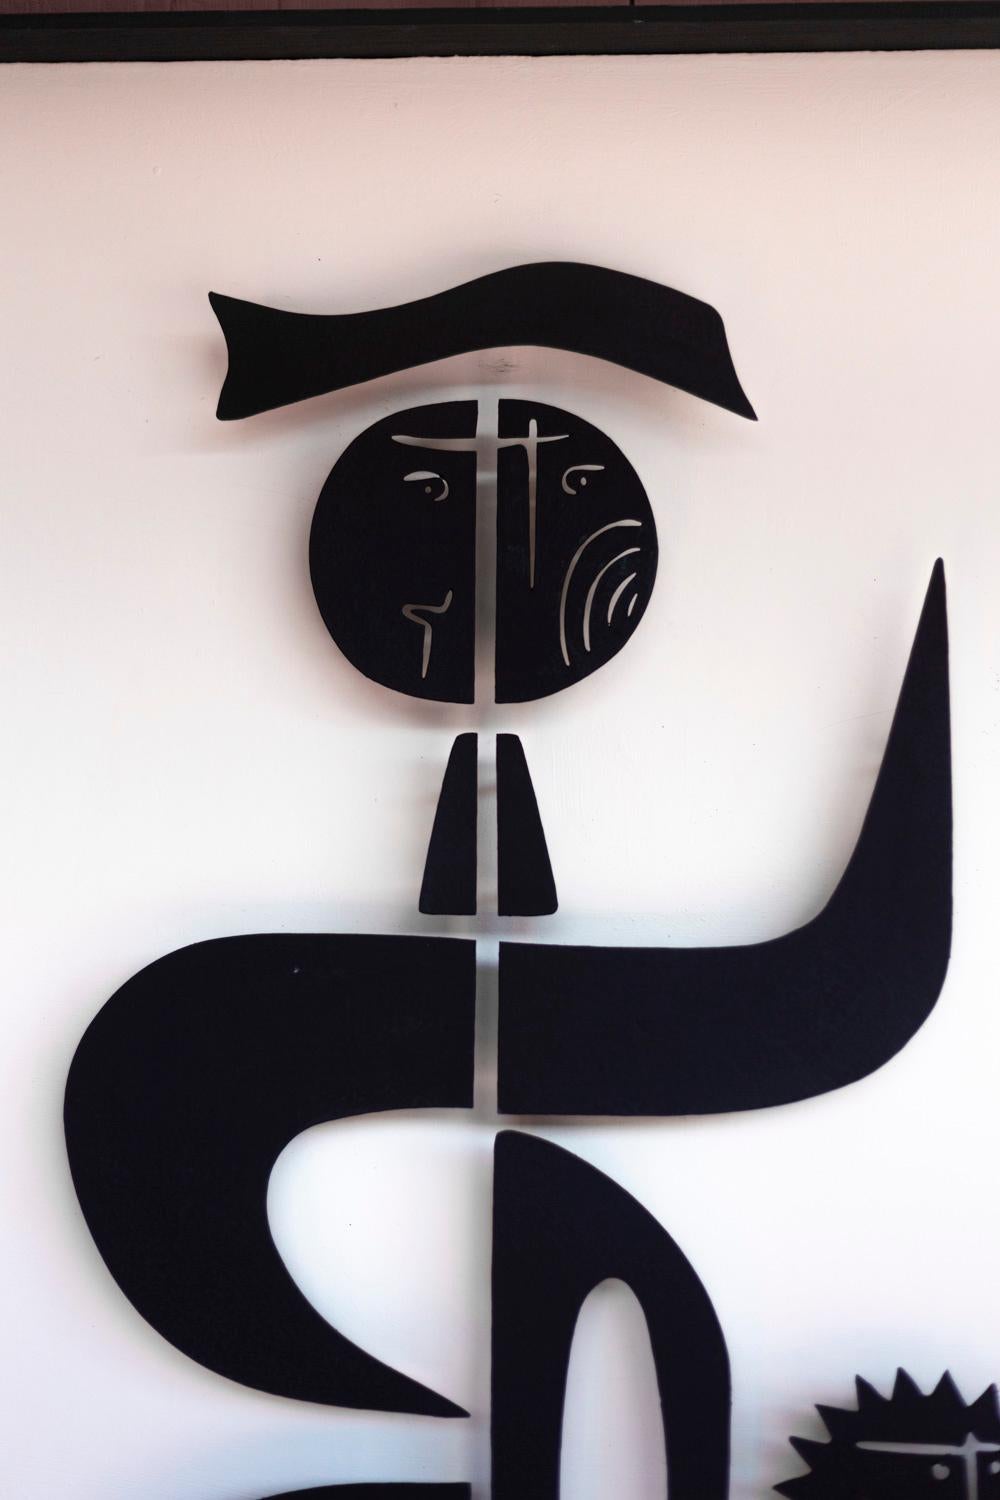 Antonine de Saint-Pierre, signed.

Bas-relief named “Monsieur Soleil” in black lacquered metal on a white background figuring an abstract character, in the cubism style.

Black lacquered wood frame.

French contemporary work.

Signed and